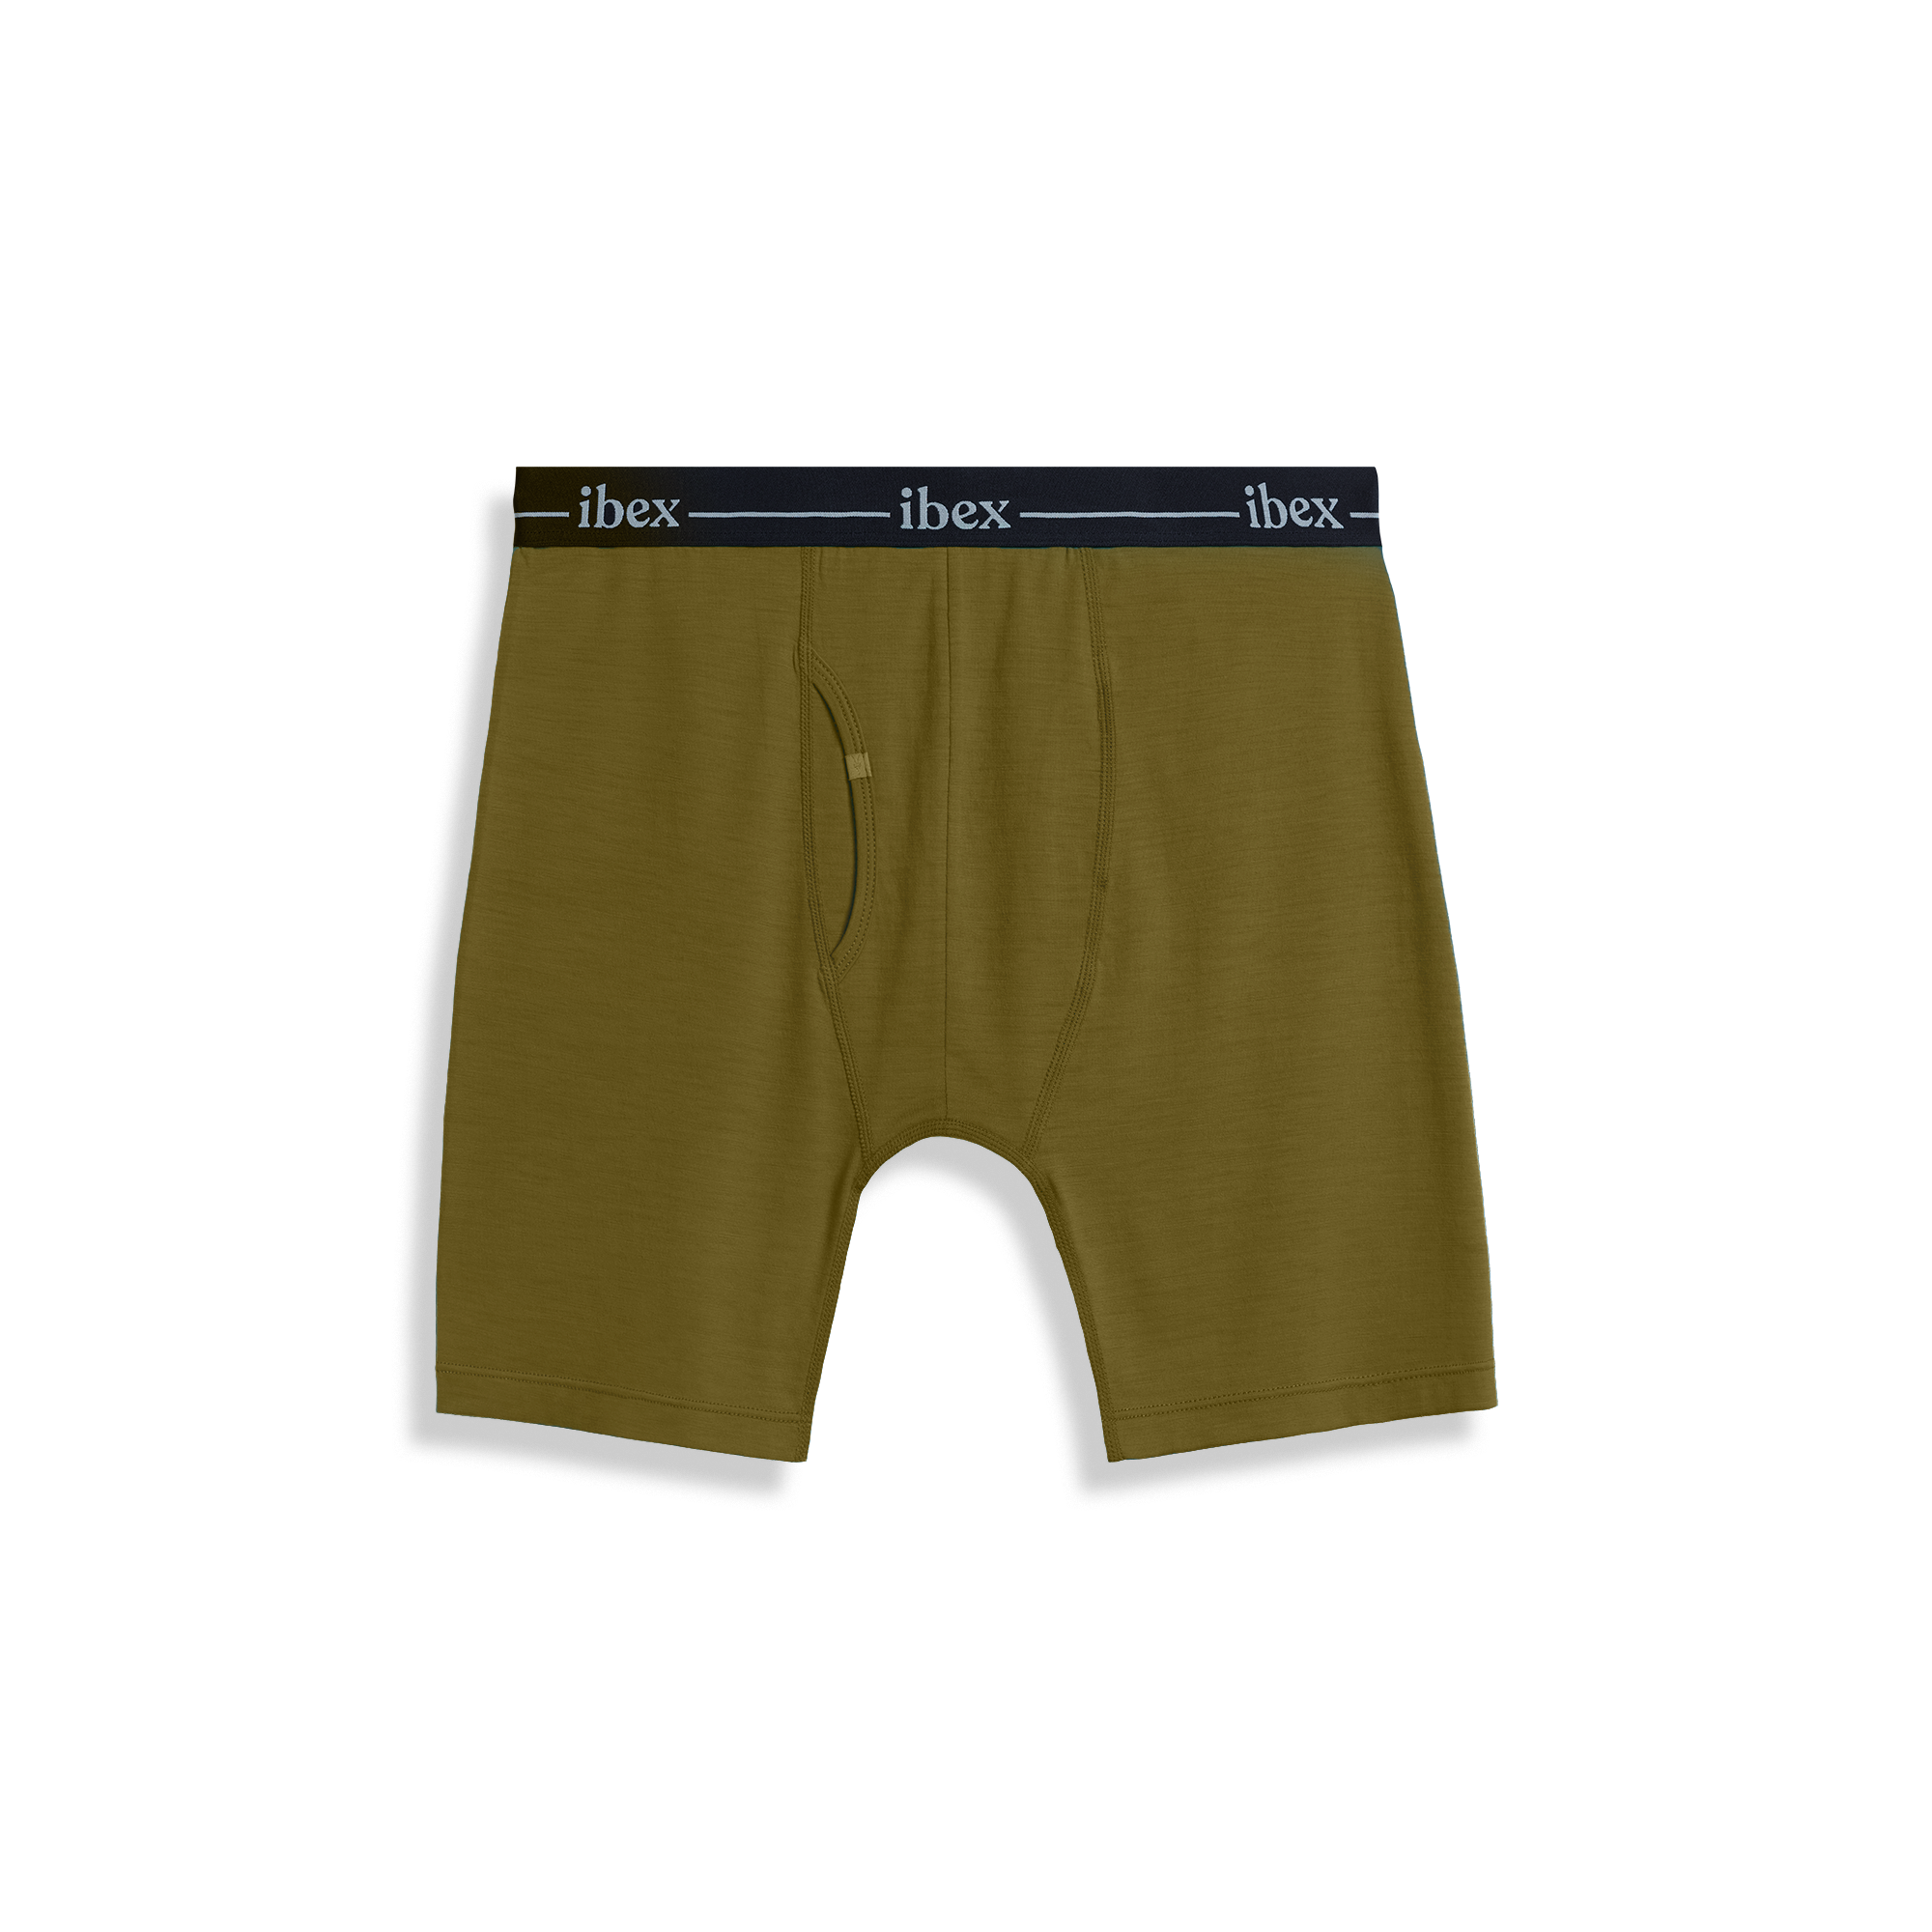 Ibex - Wool underwear sounds strange right? Ibex Merino defies clammy,  damp and sweaty with its naturally breathable fiber. While synthetic  fabrics can wick away sweat, Merino keeps the body cool by